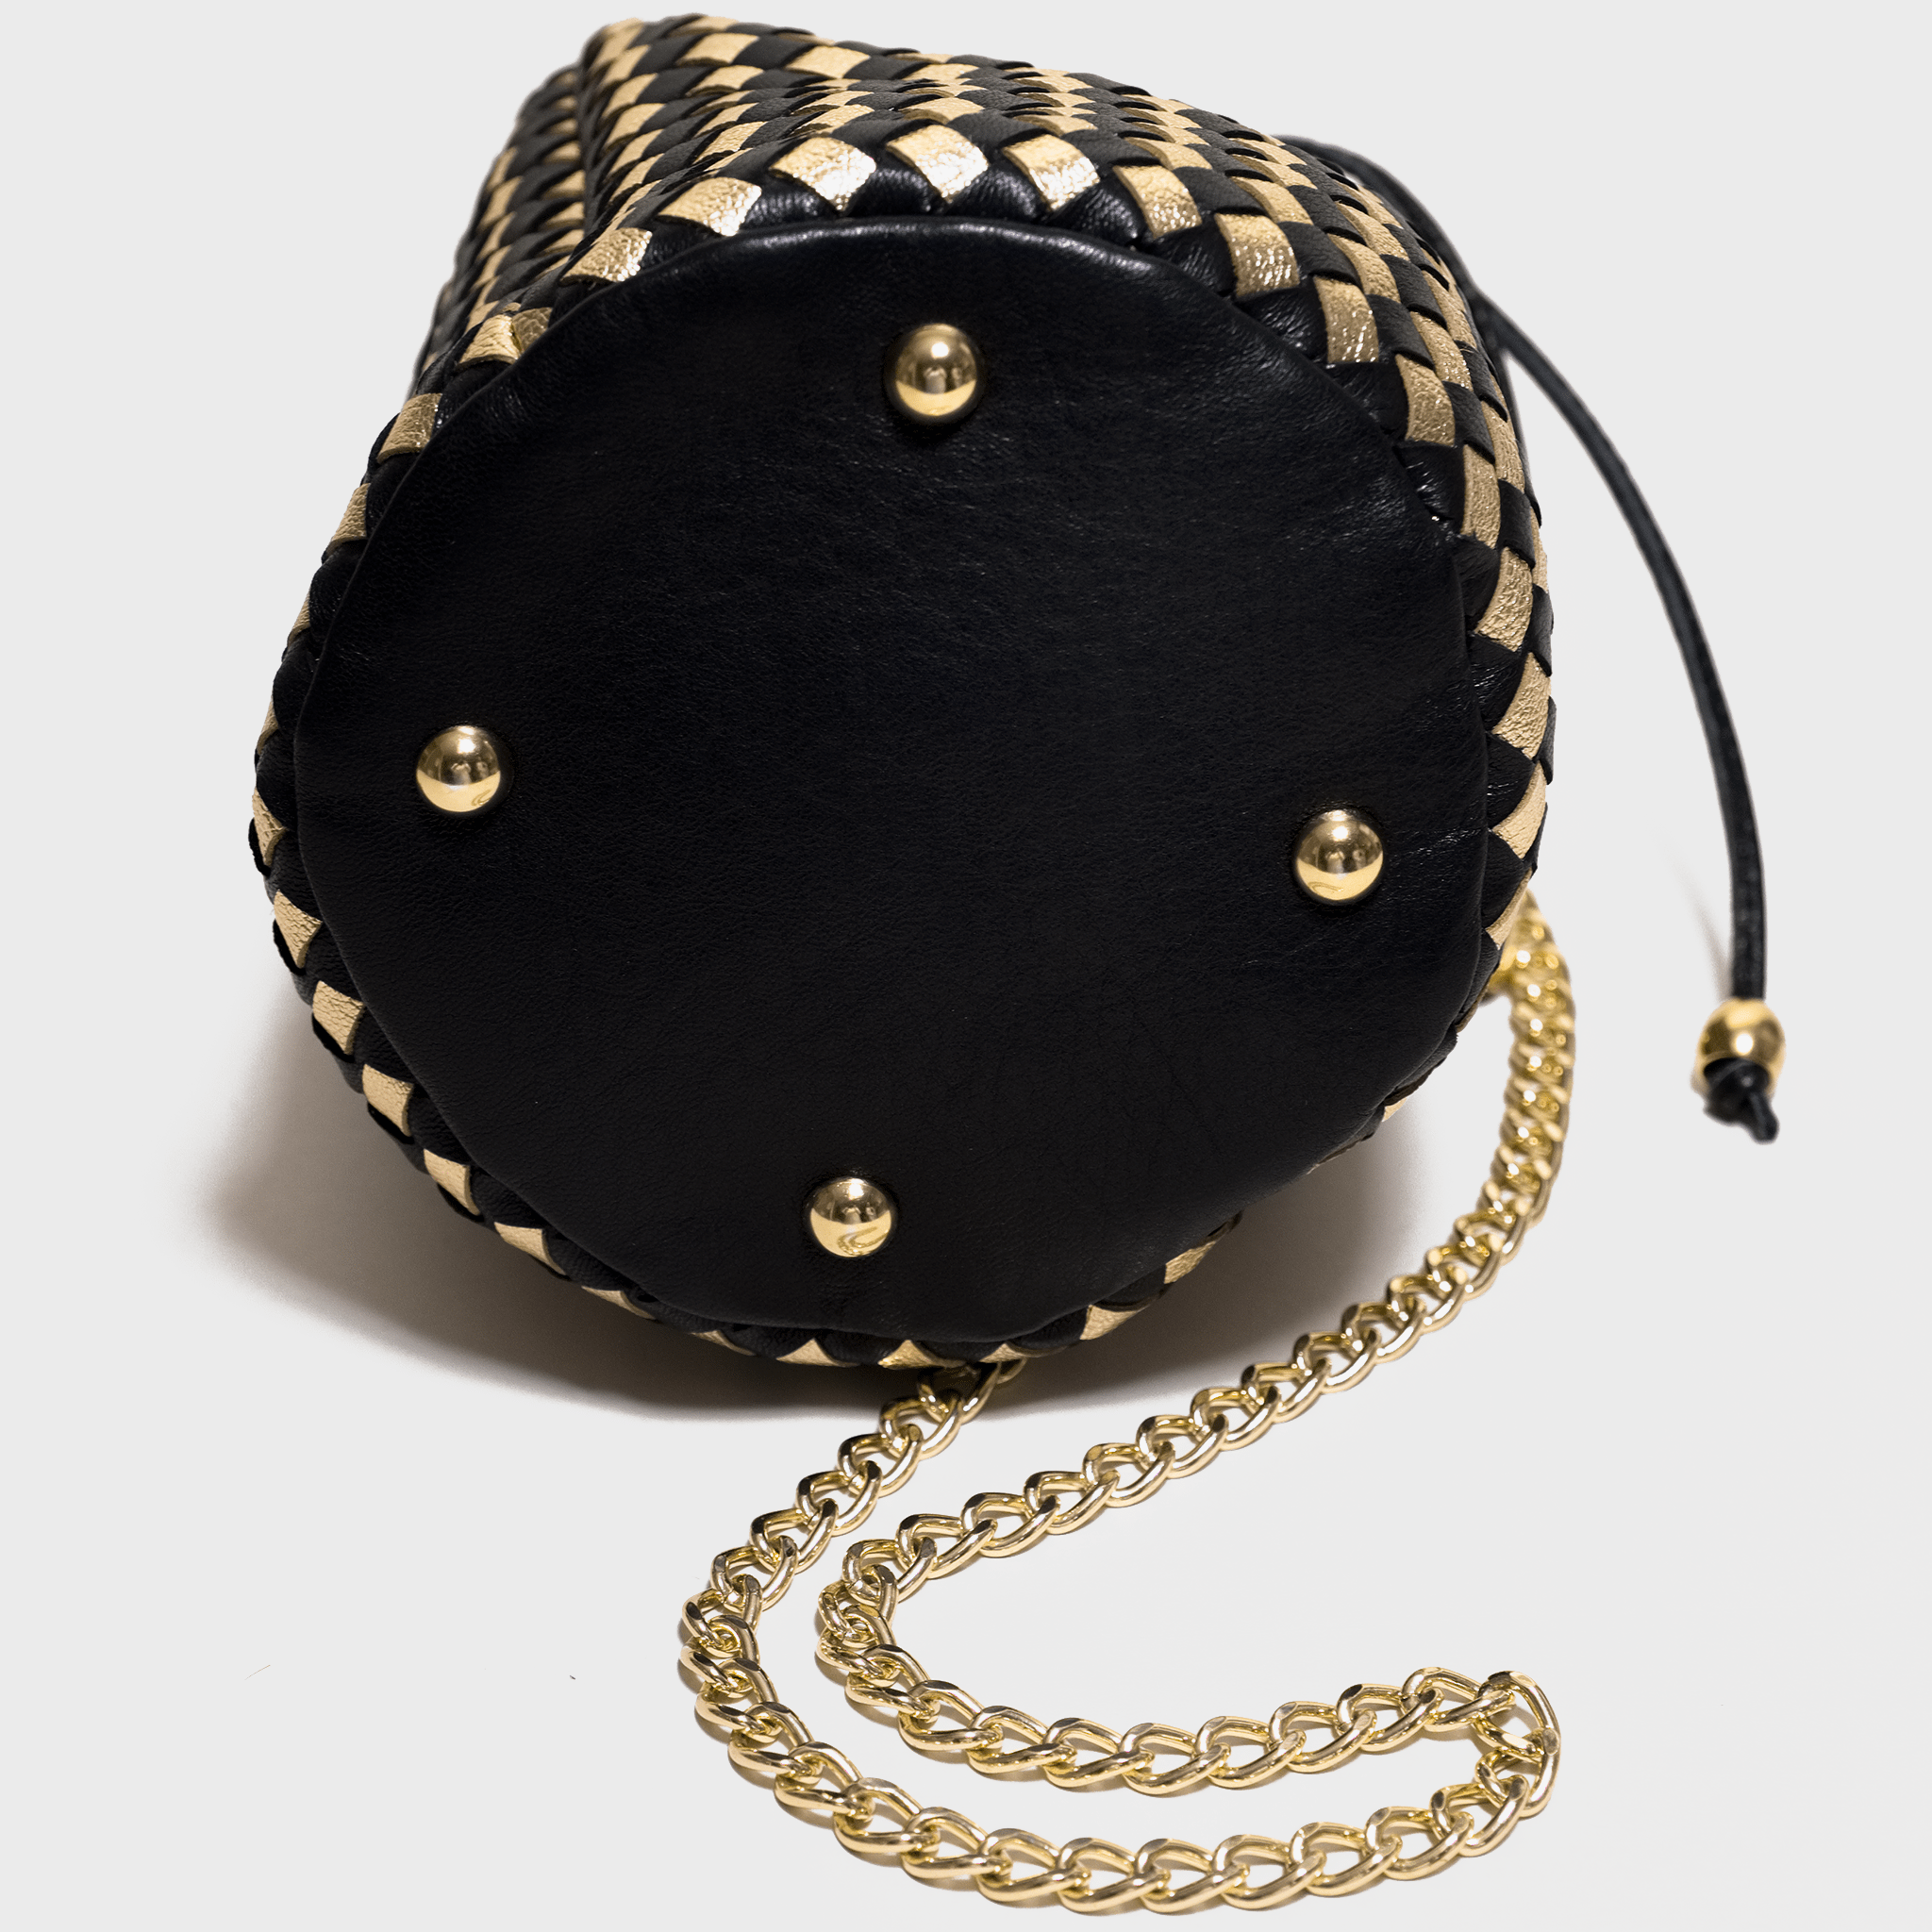 Black woven leather bag Bucket bag with chain shoulder. Handmade in Italy